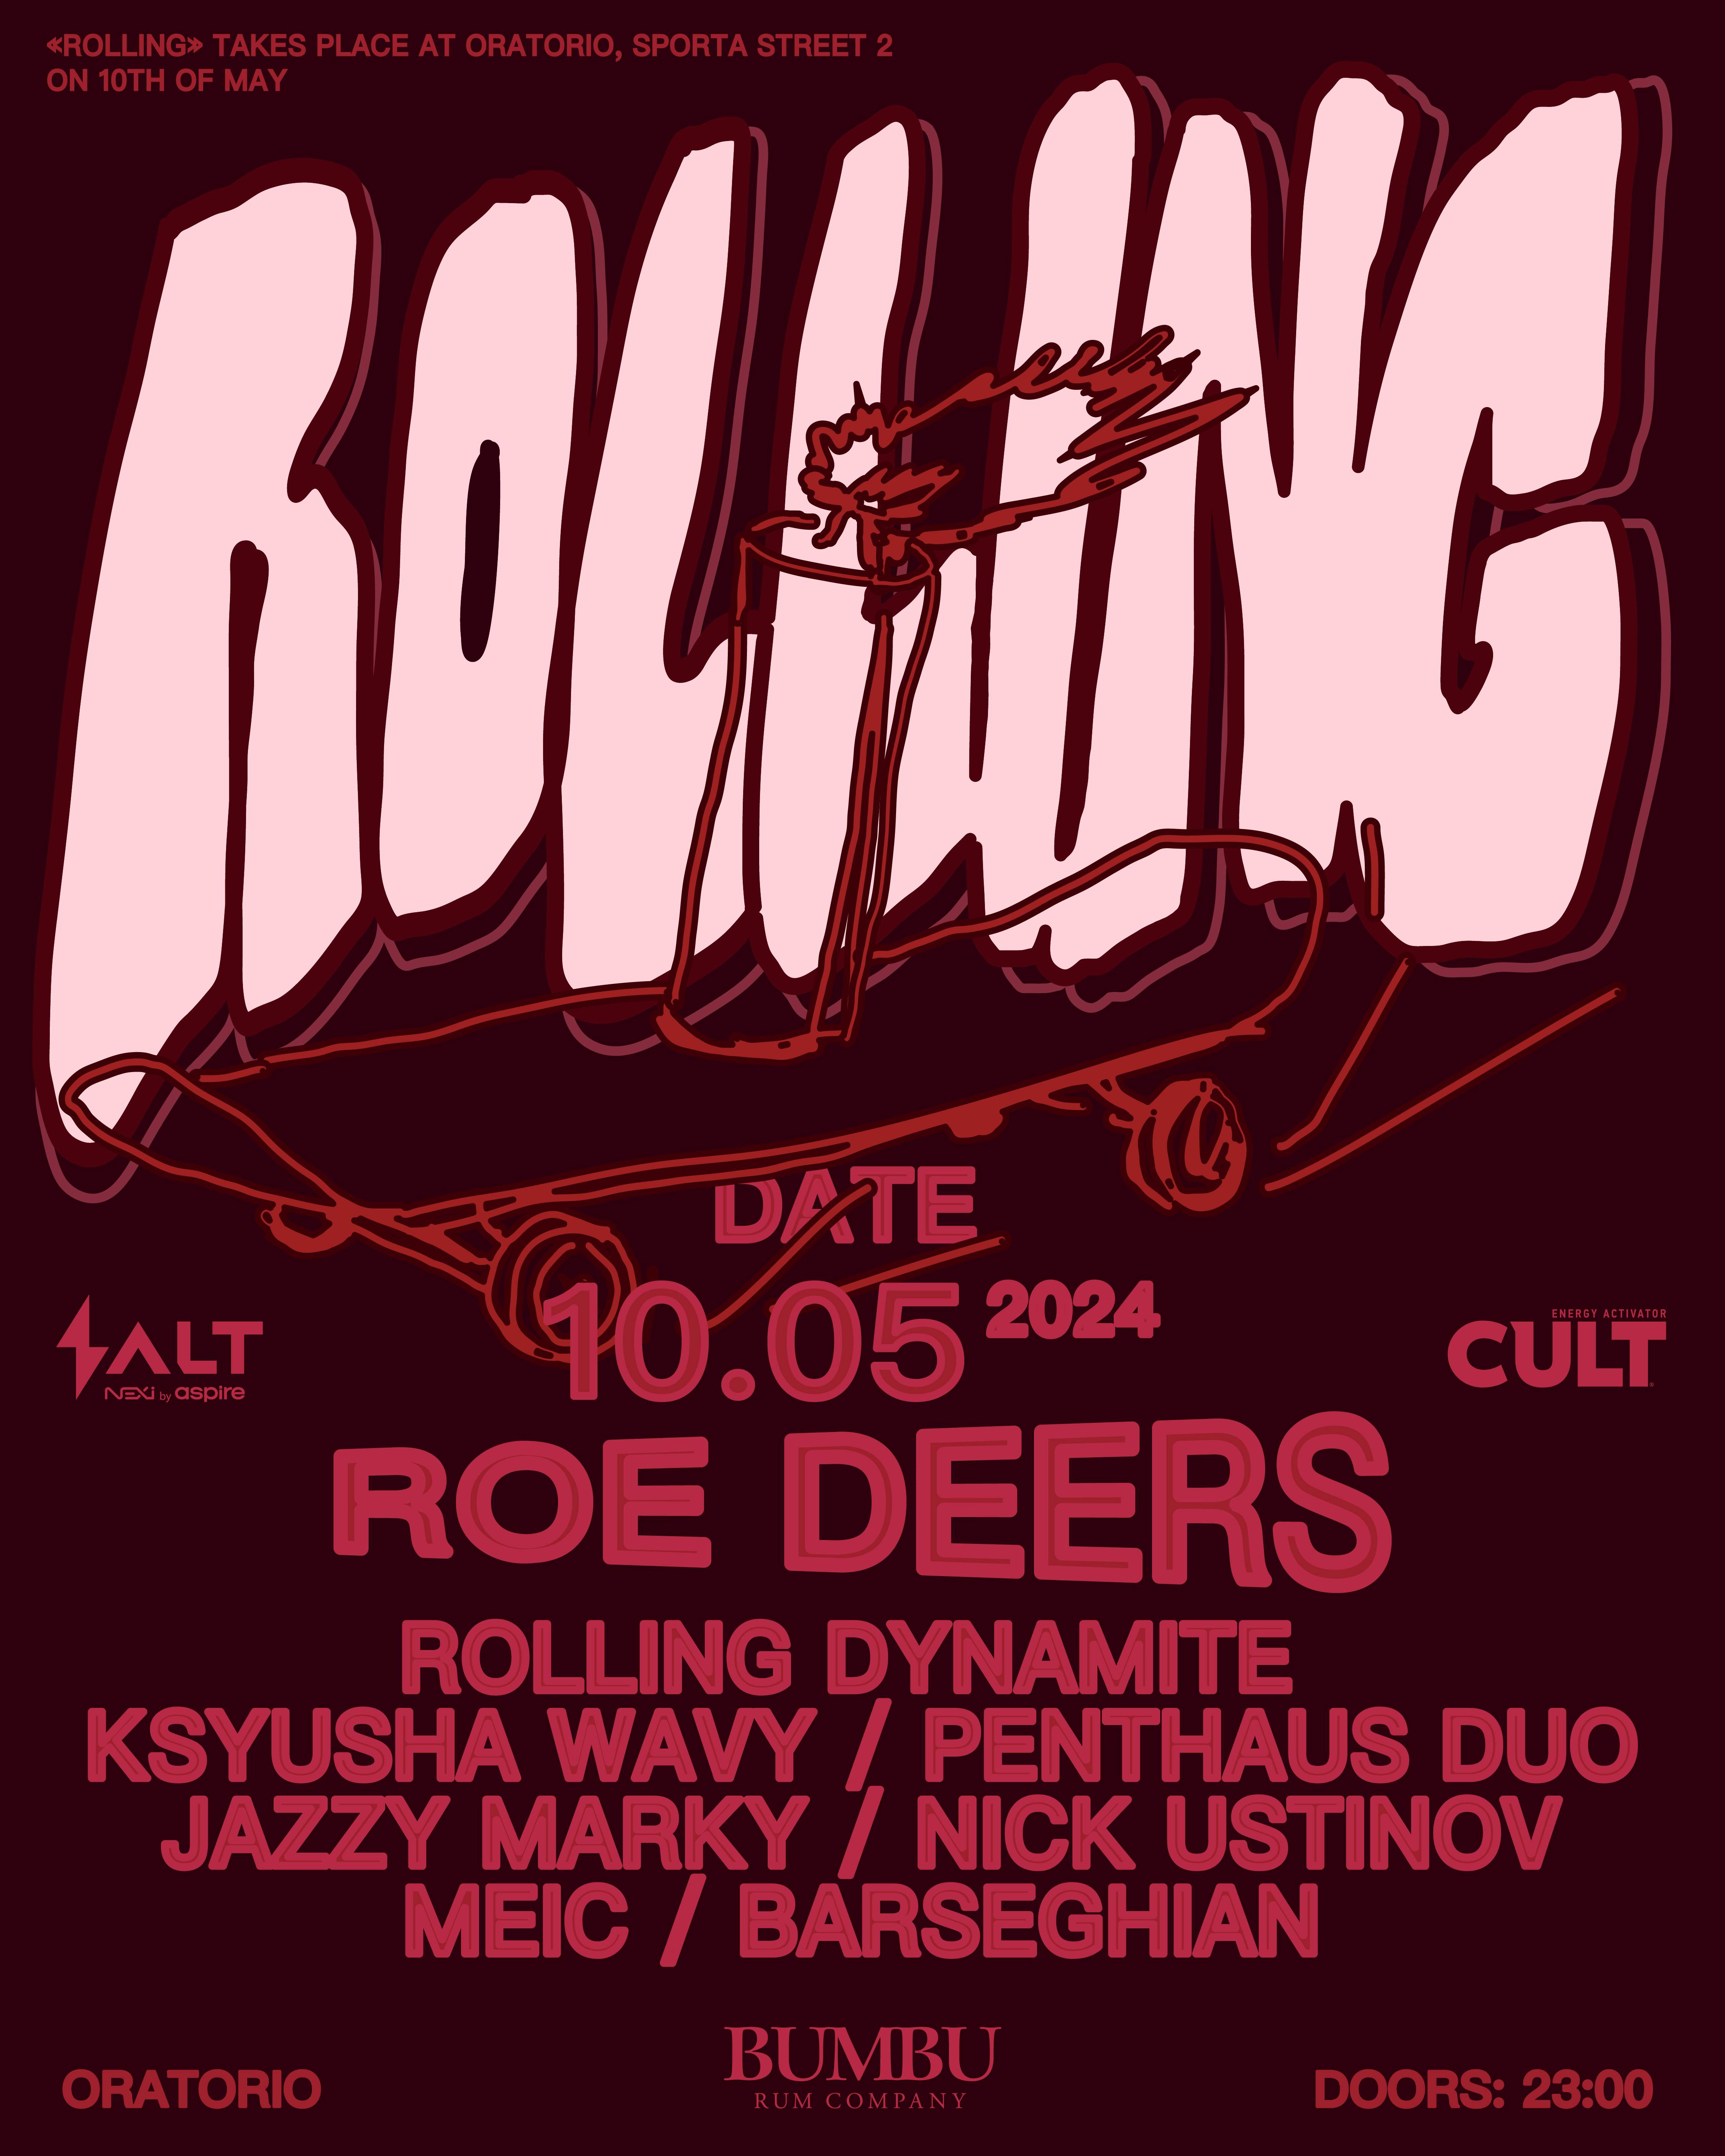 Rolling Dynamite presents 'Rolling'. Roe Deers, Penthouse Duo, Barseghian + more - フライヤー表